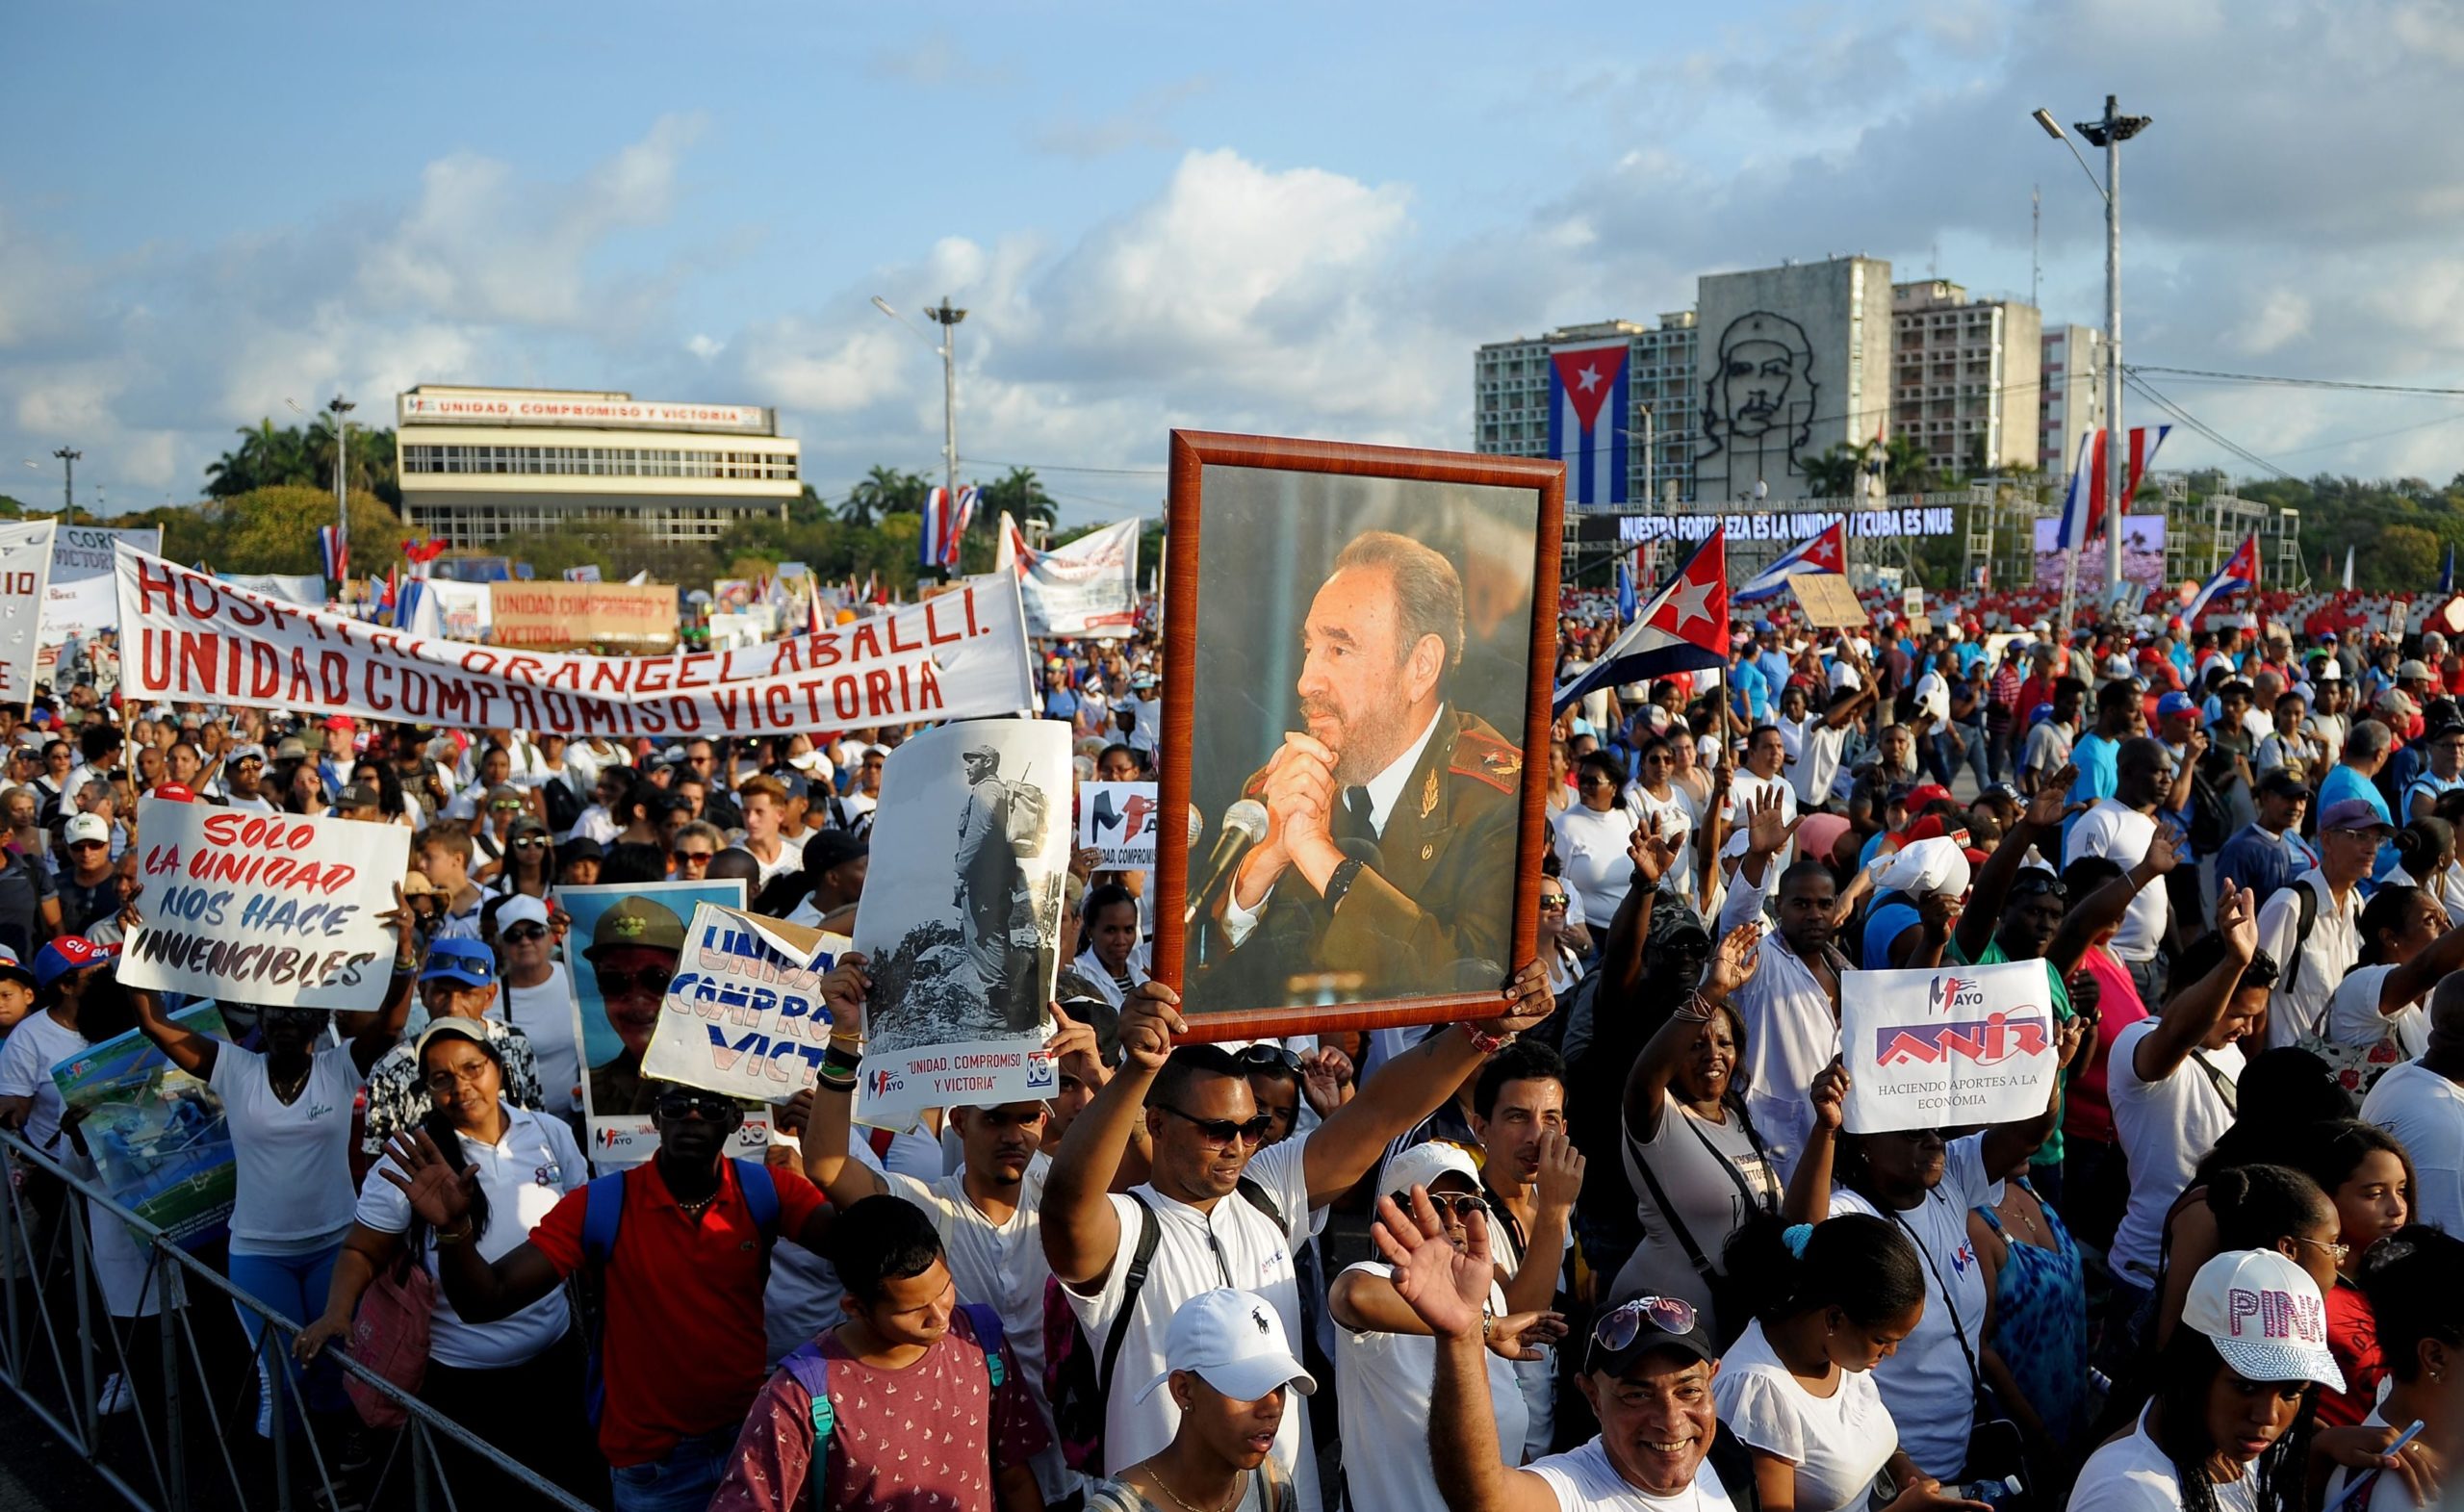 A poster with an image of late Cuban leader Fidel Castro is seen amid the crowd during the May Day rally at Revolution Square in Havana on May 1, 2018.  (Photo: Yamil Lage, Getty Images)